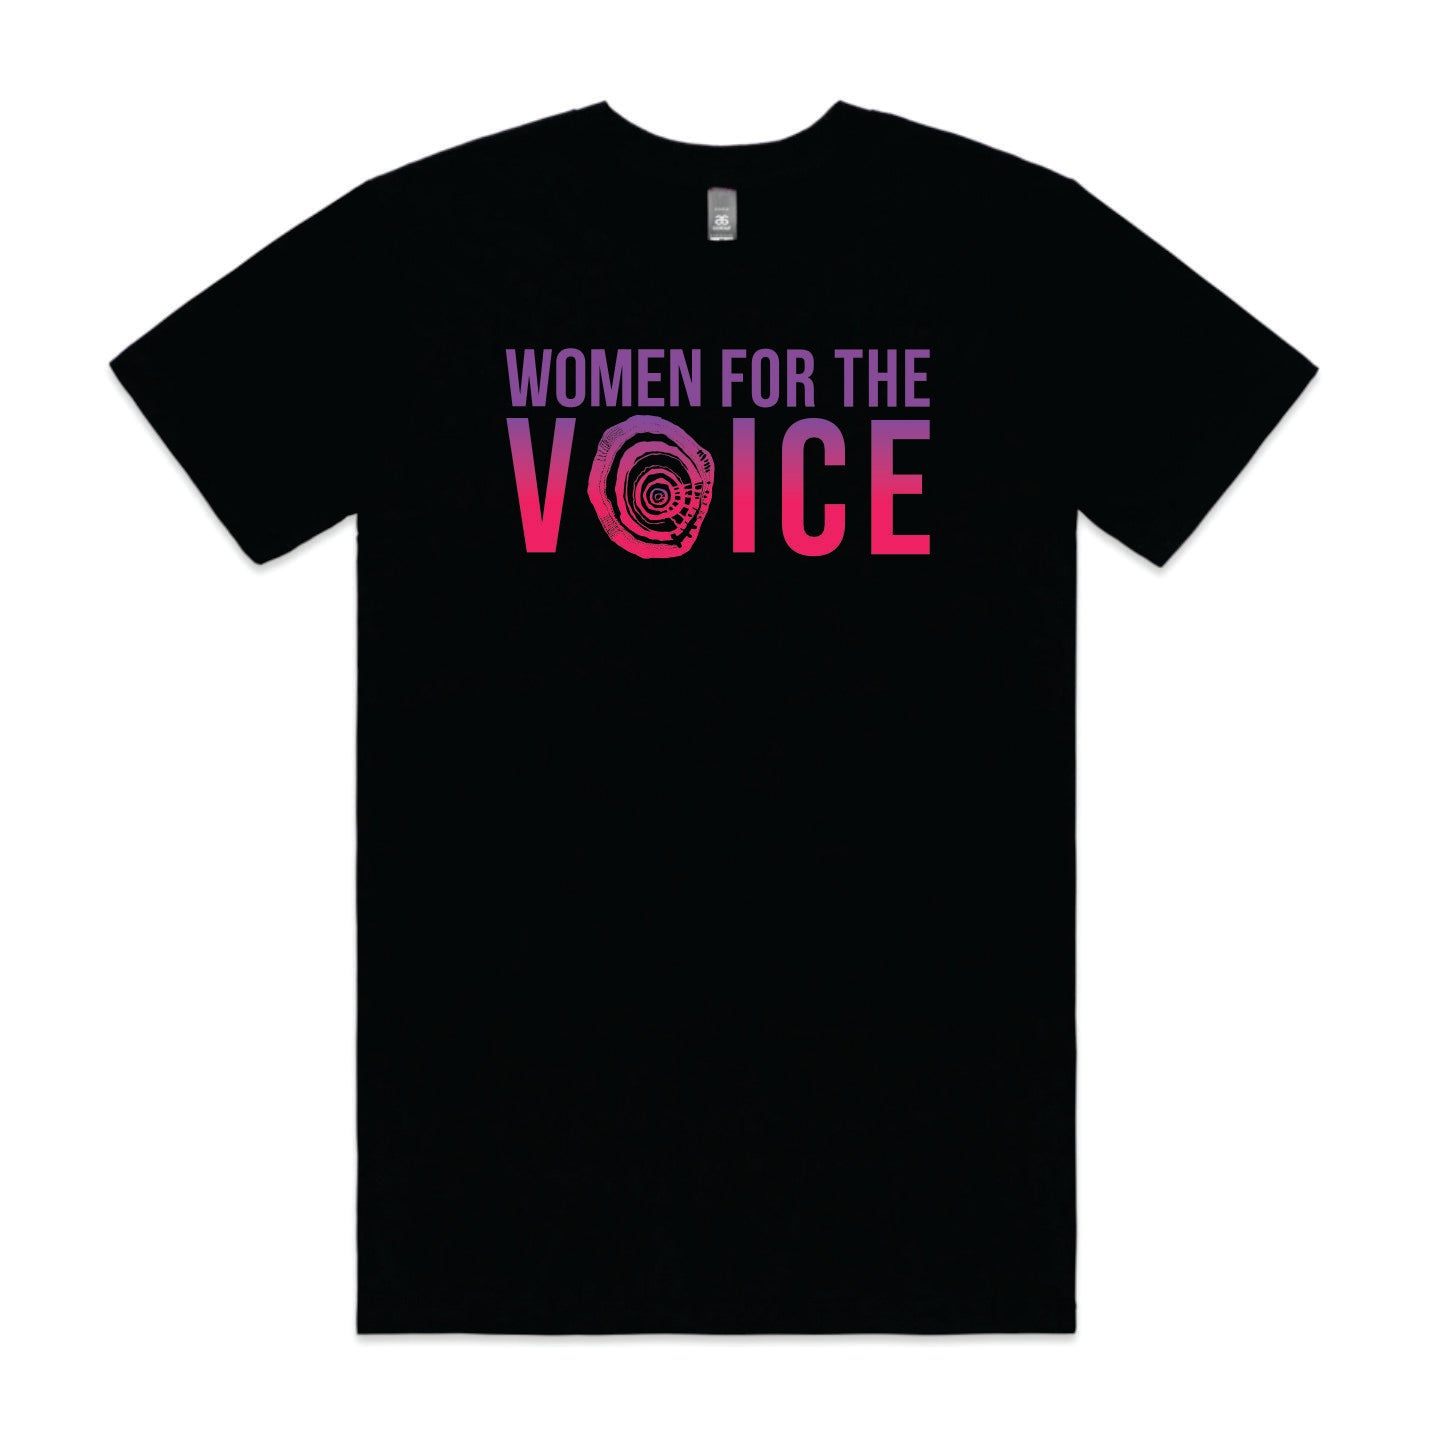 Women for the Voice shirts